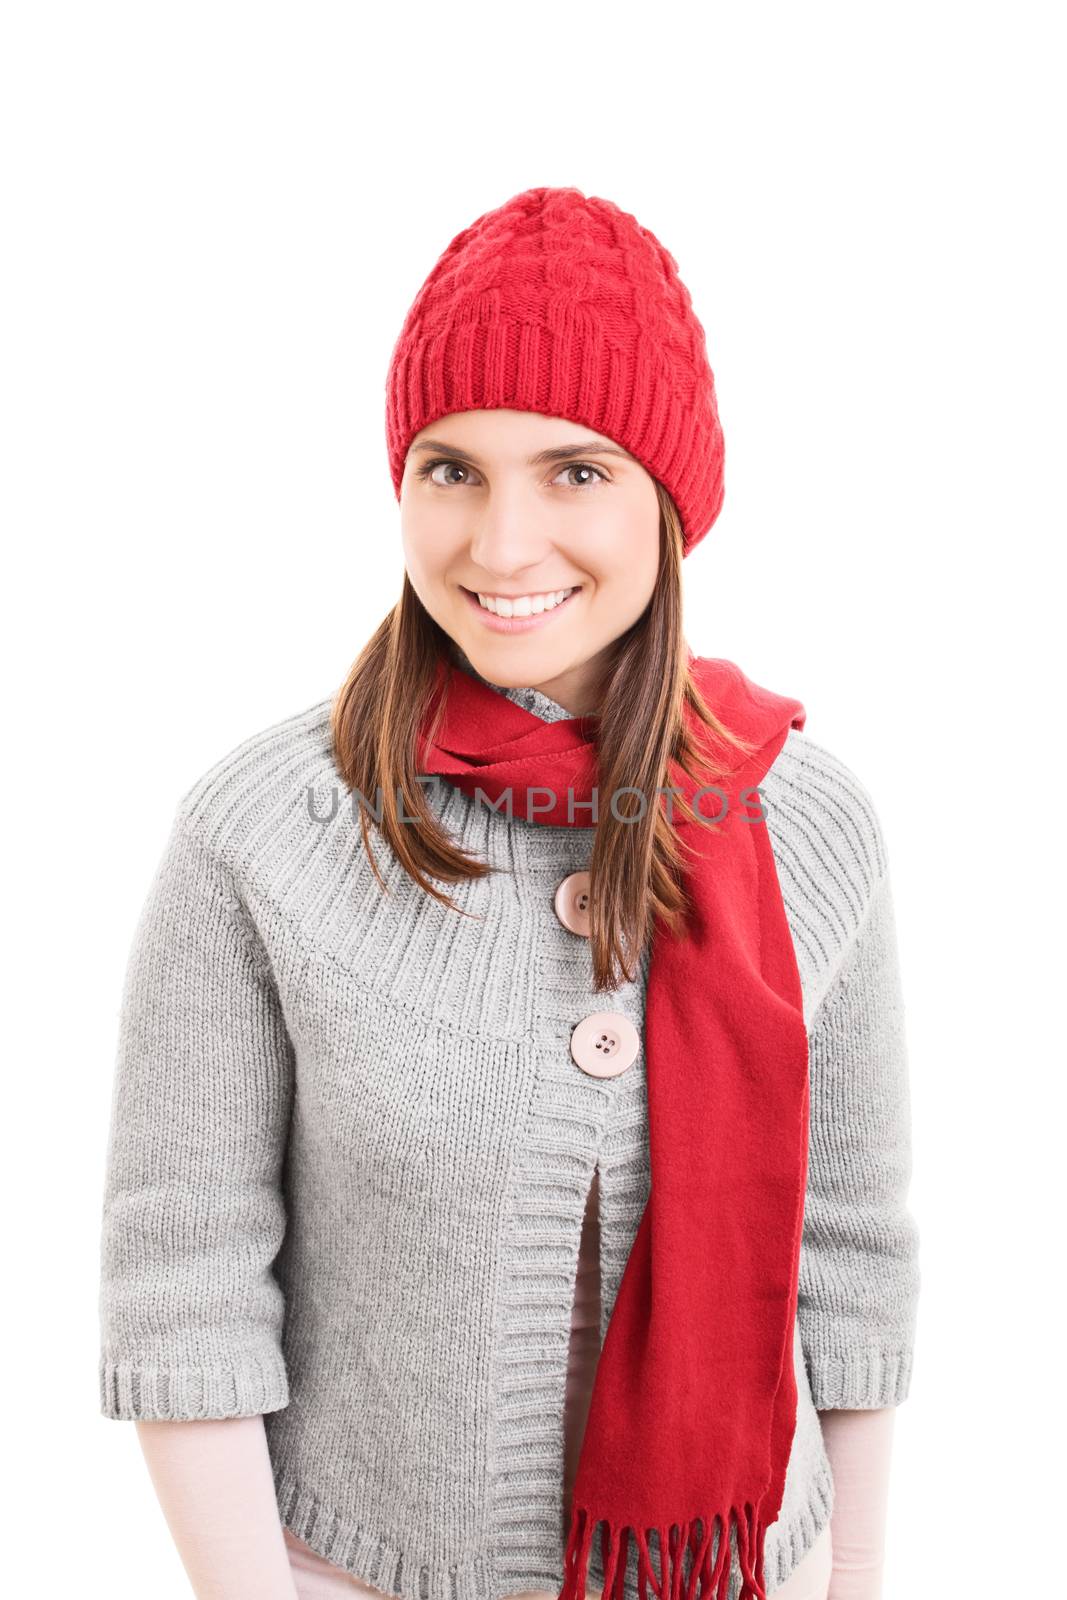 Portrait of a beautiful smiling young girl wearing warm red winter scarf and beanie, isolated on white background.